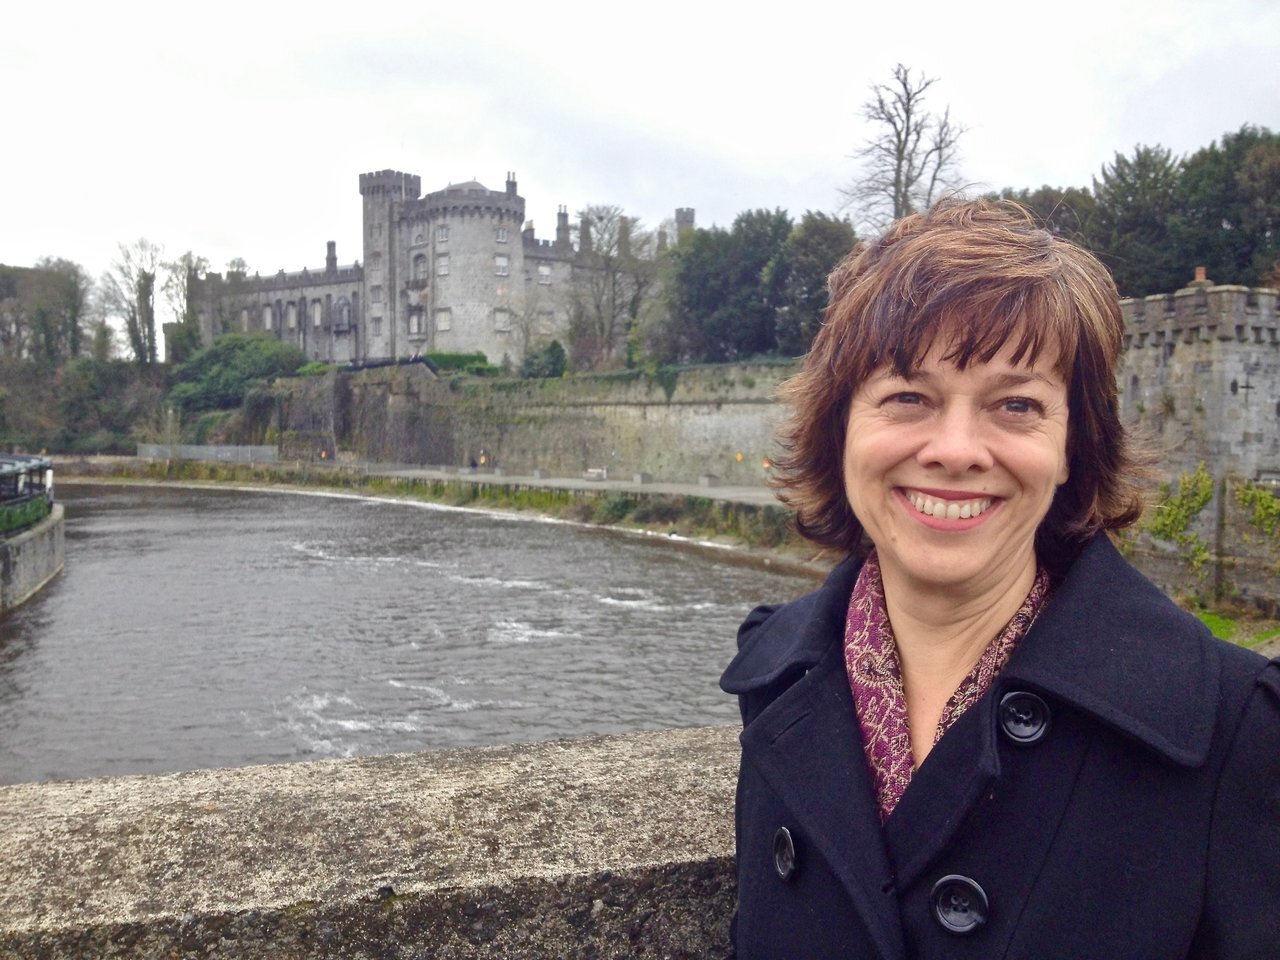 Automatisk Modig Paradis How to Spend a Great Day in Kilkenny Ireland | Euro Travel Coach